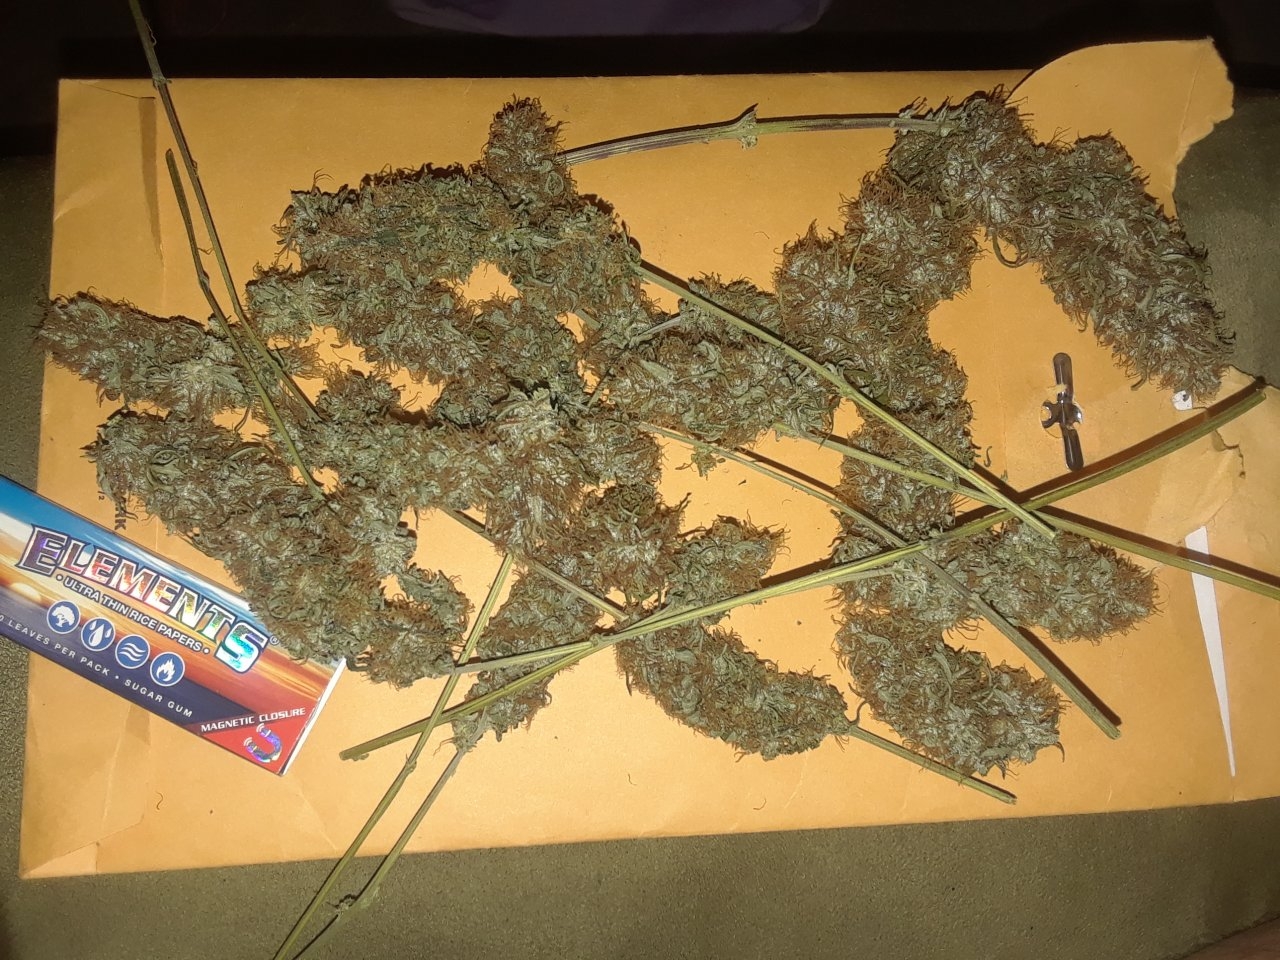 Piney's yield after drying